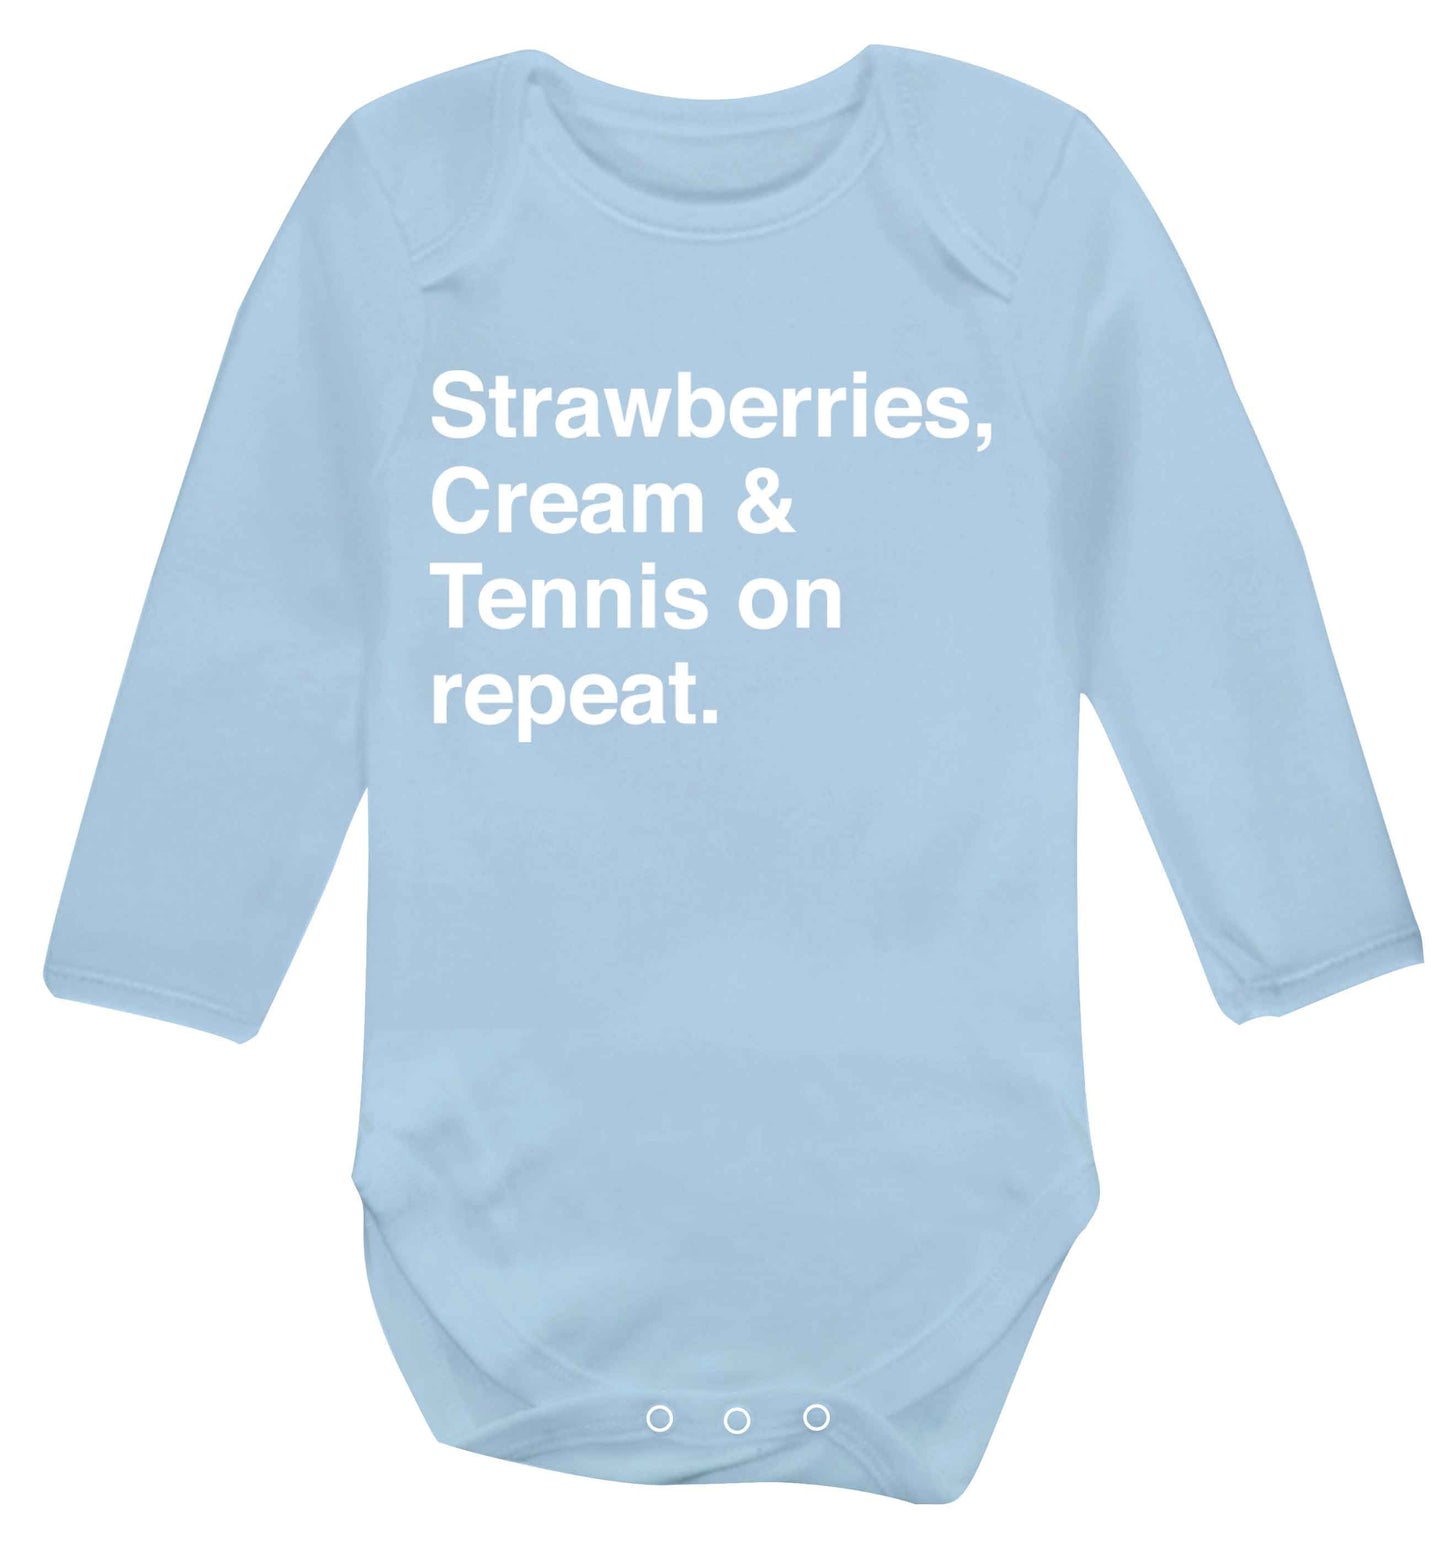 Strawberries, cream and tennis on repeat Baby Vest long sleeved pale blue 6-12 months